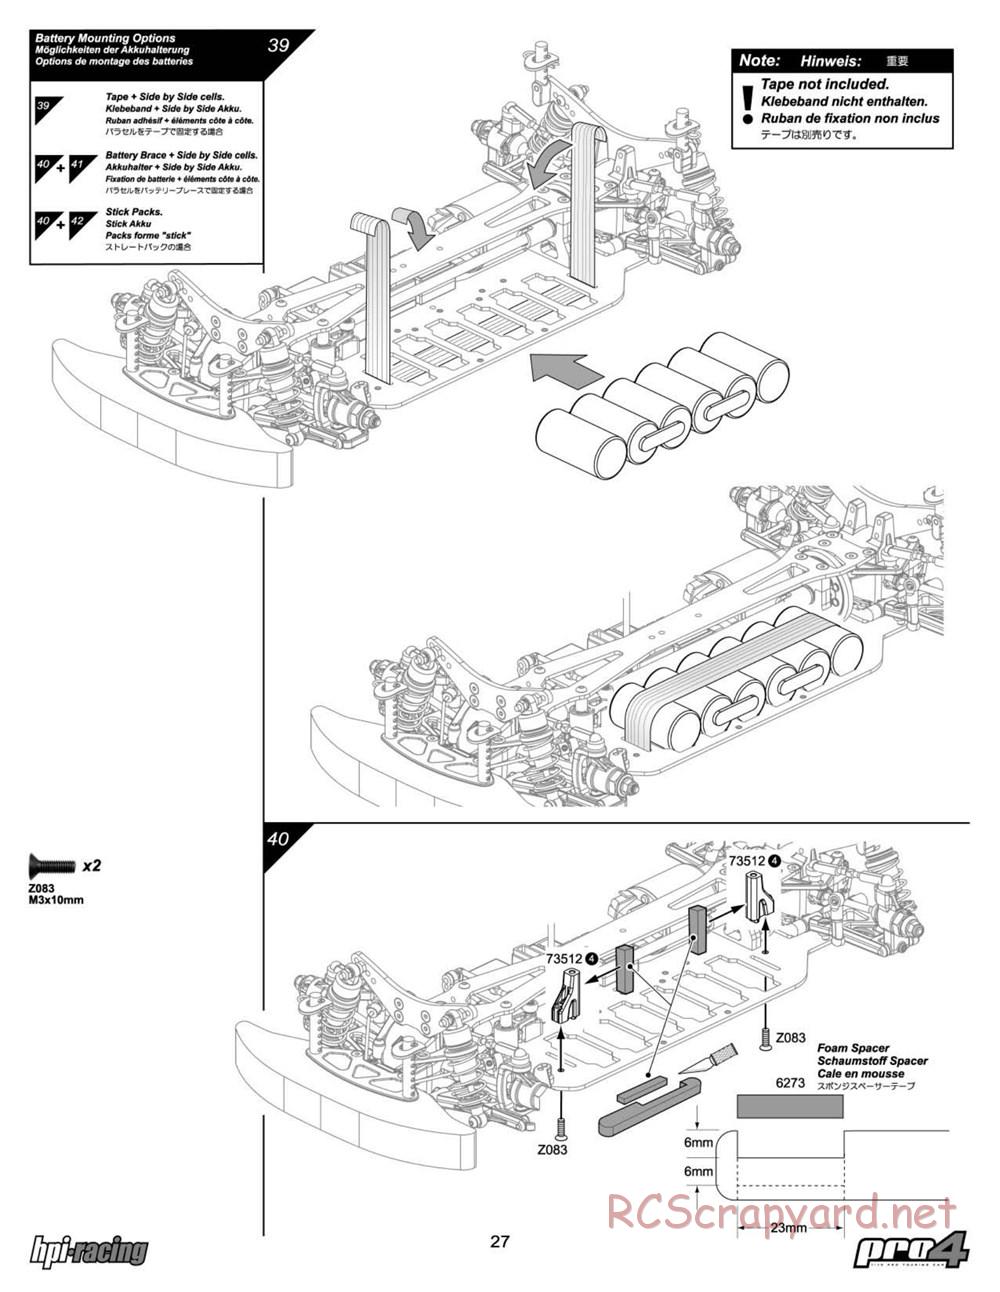 HPI - RS4 Pro4 - Manual - Page 27